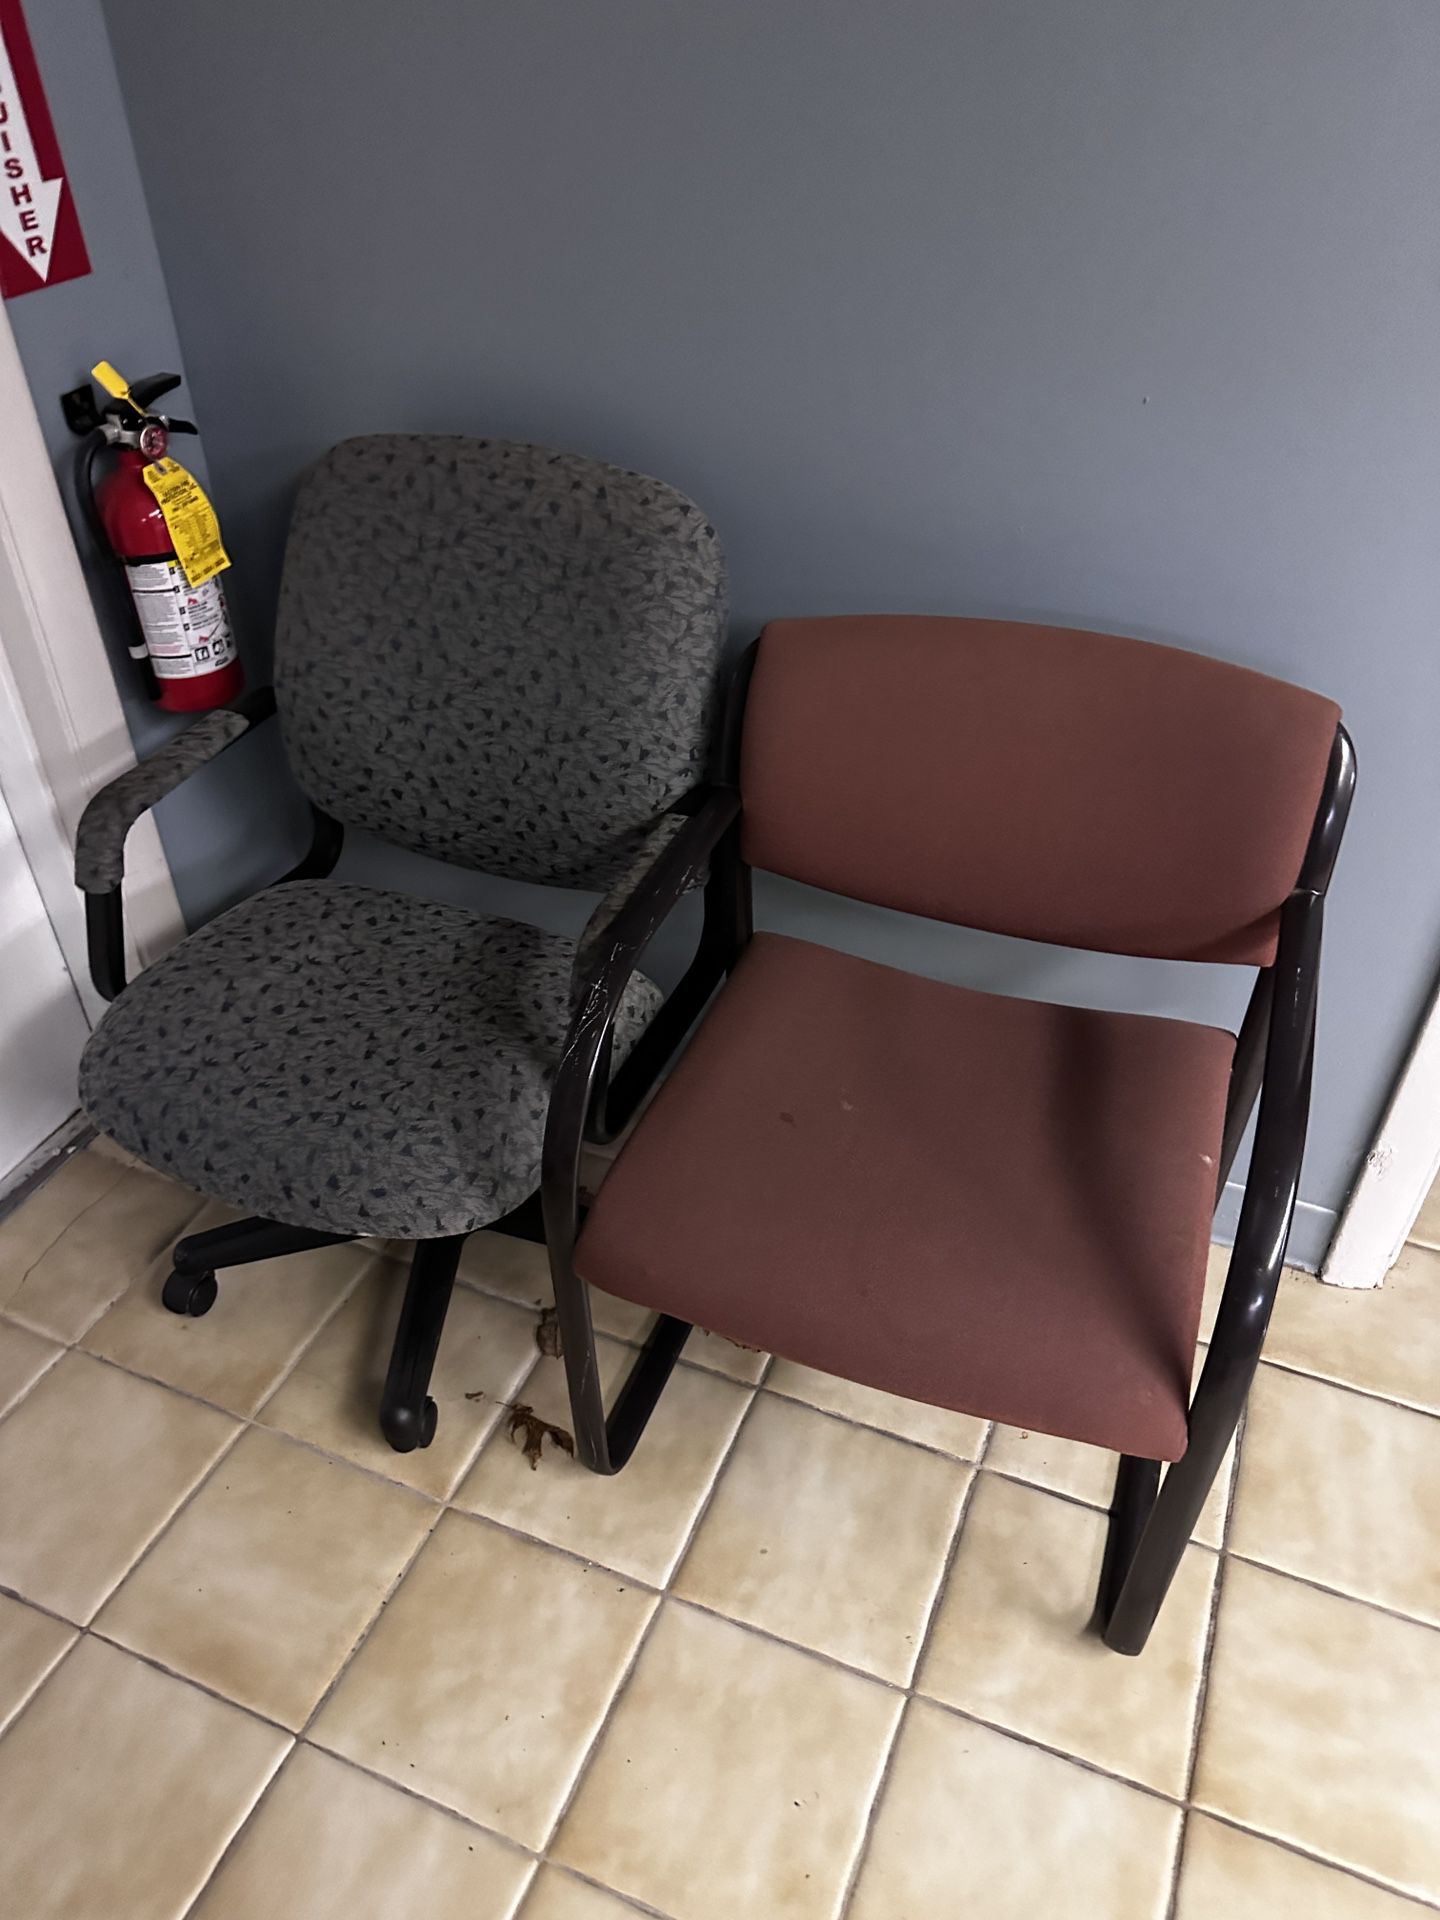 two office chairs